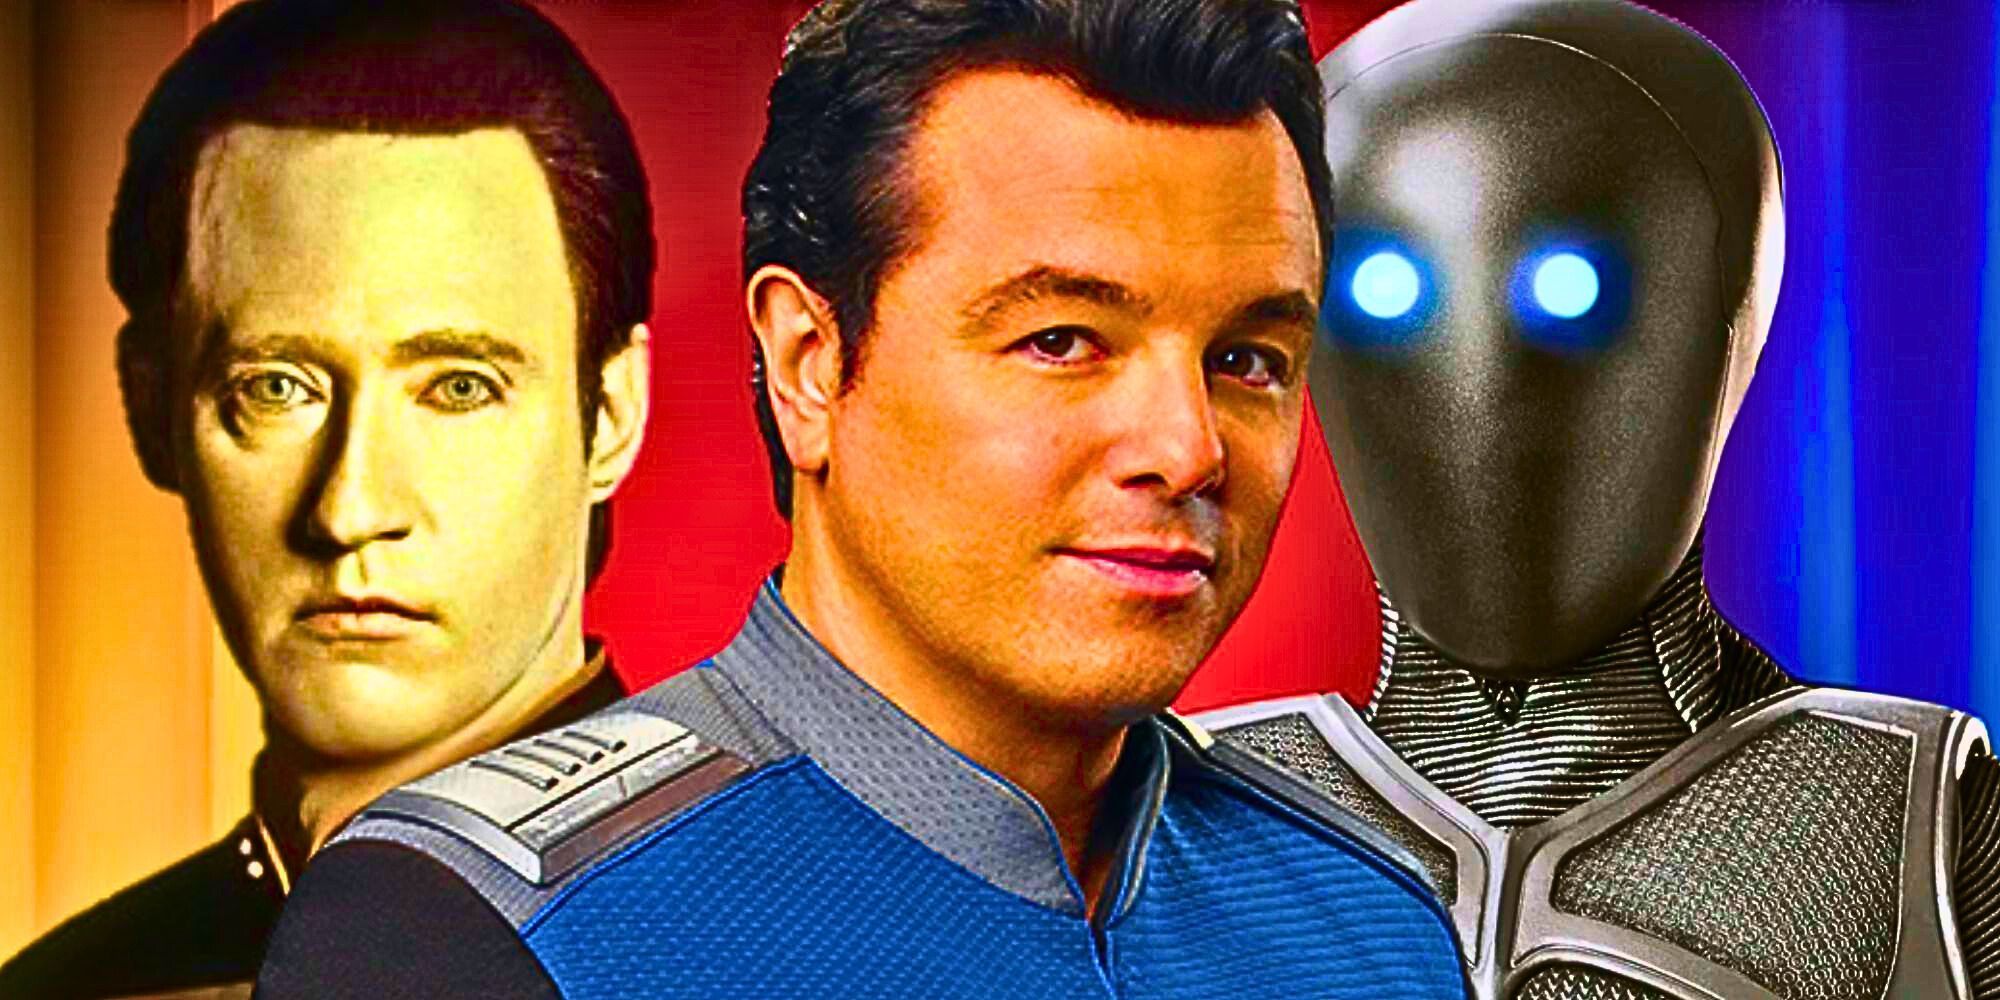 A custom image of Data from Star Trek: The Next Generation and The Orville's Ed Mercer and Isaac